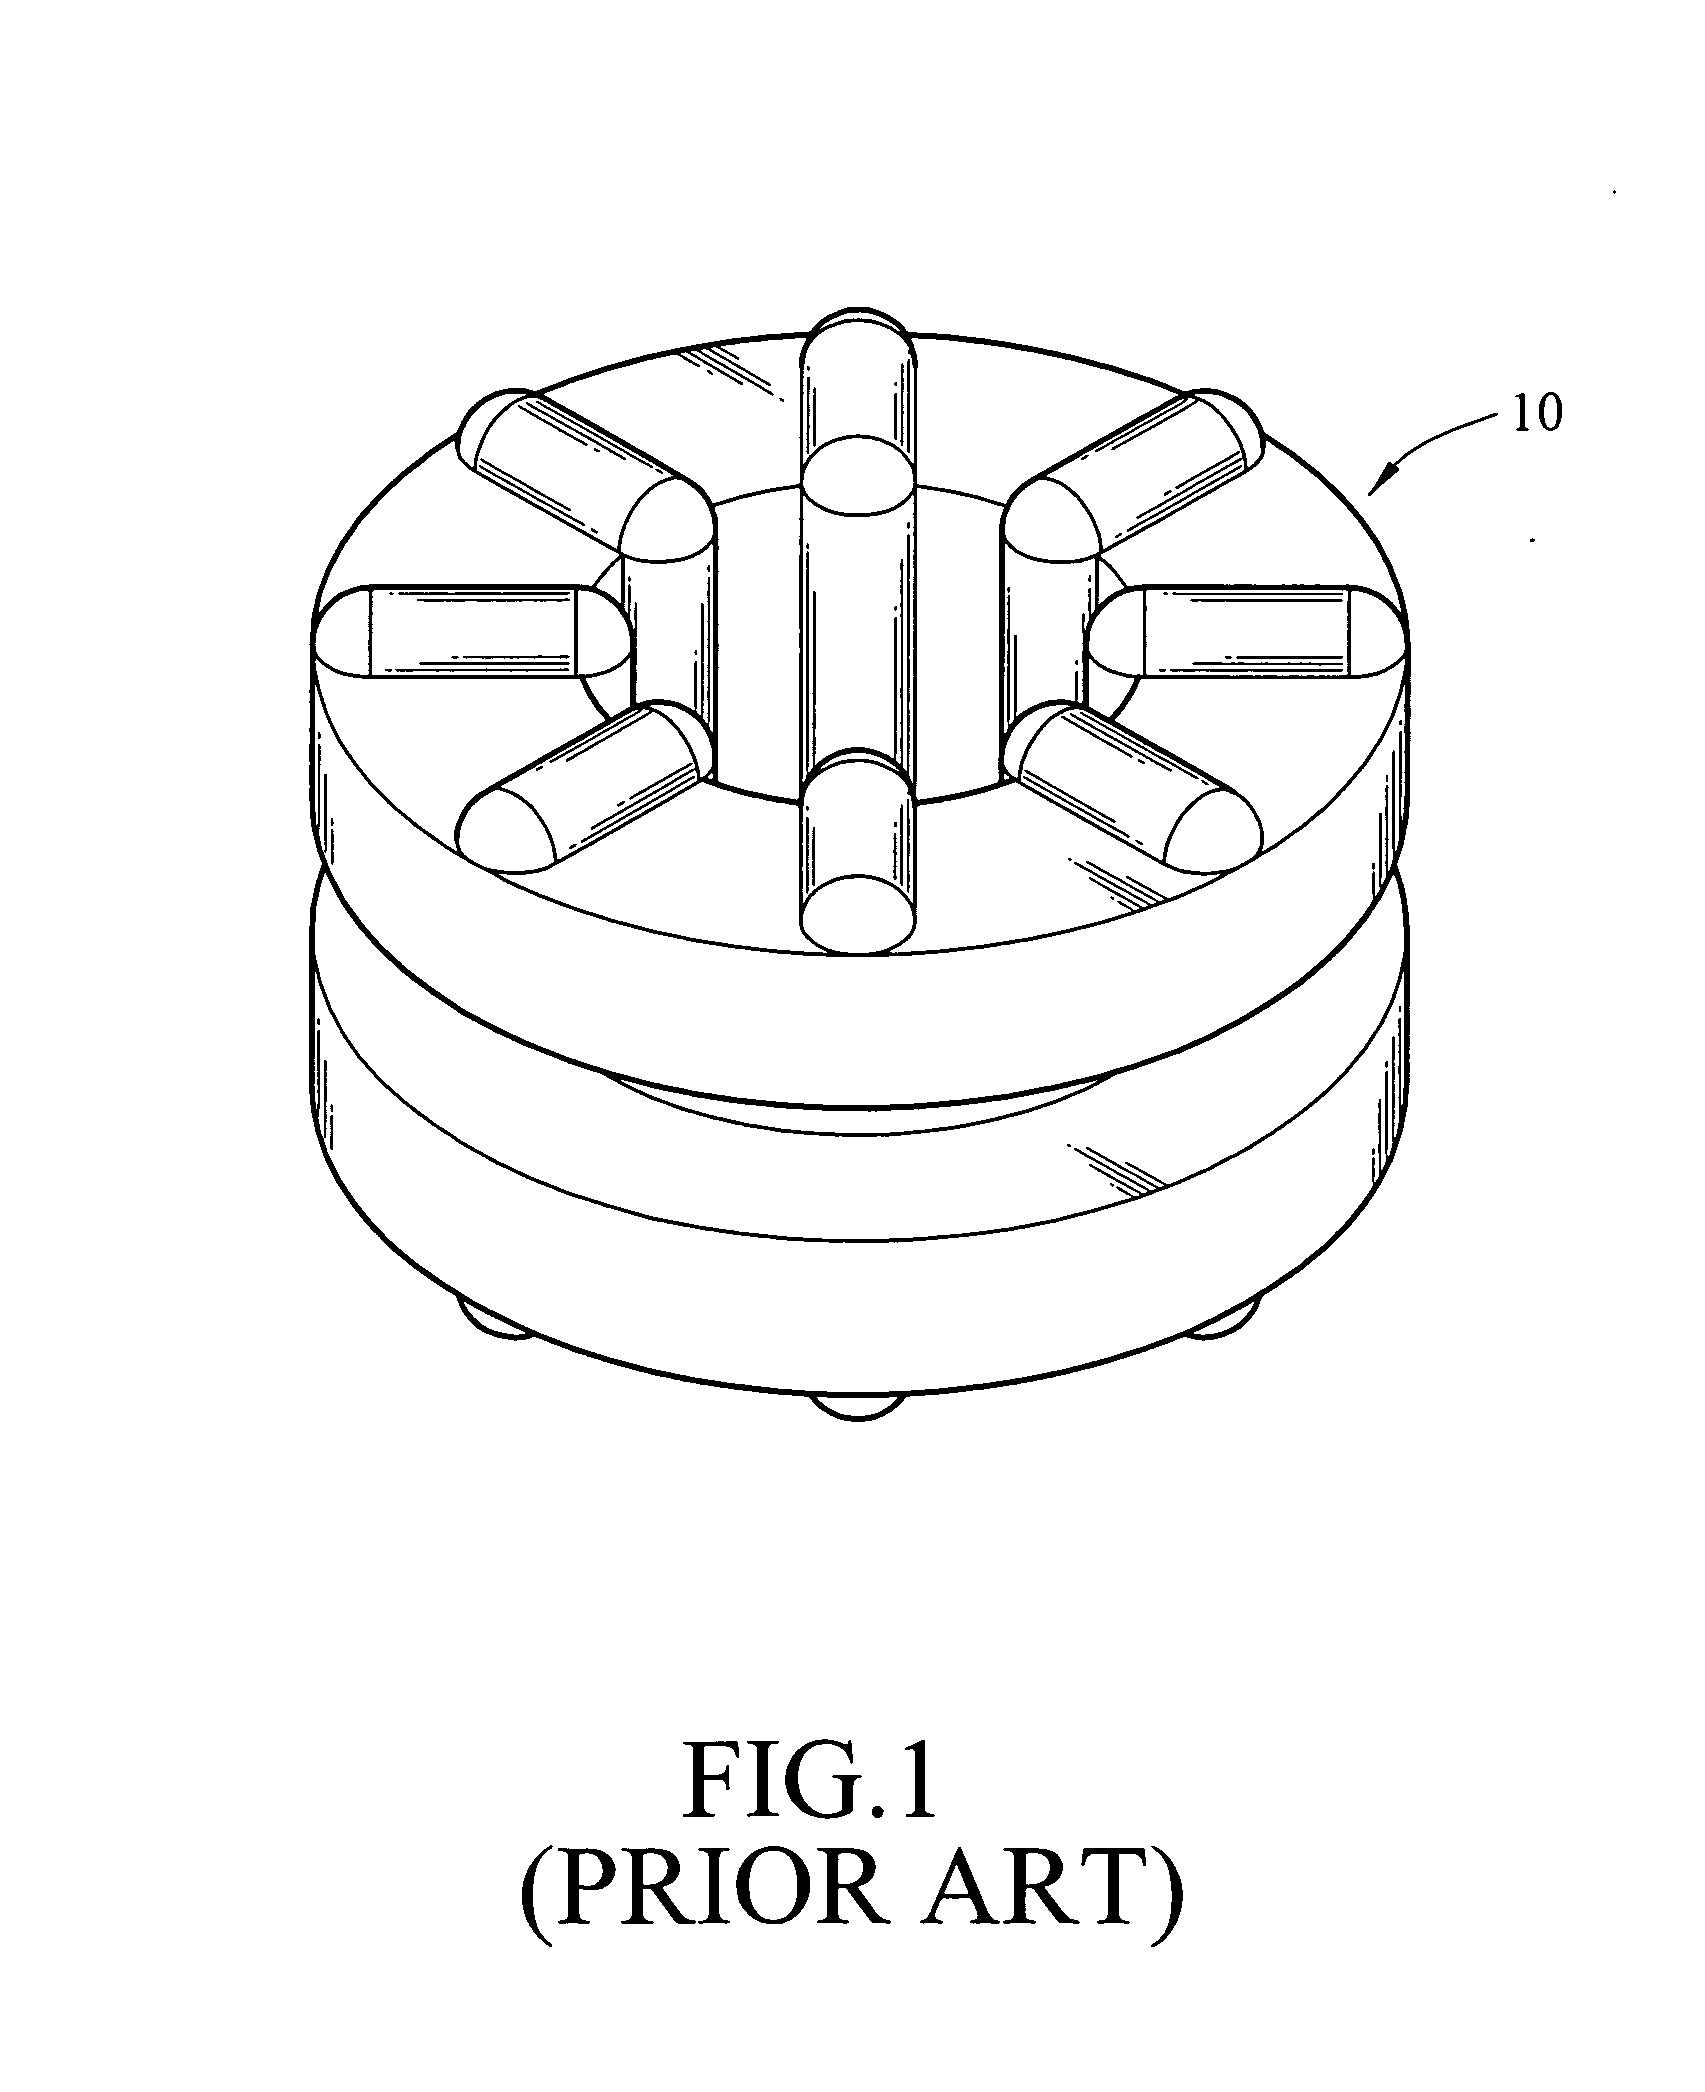 Damping ring for vibration isolation